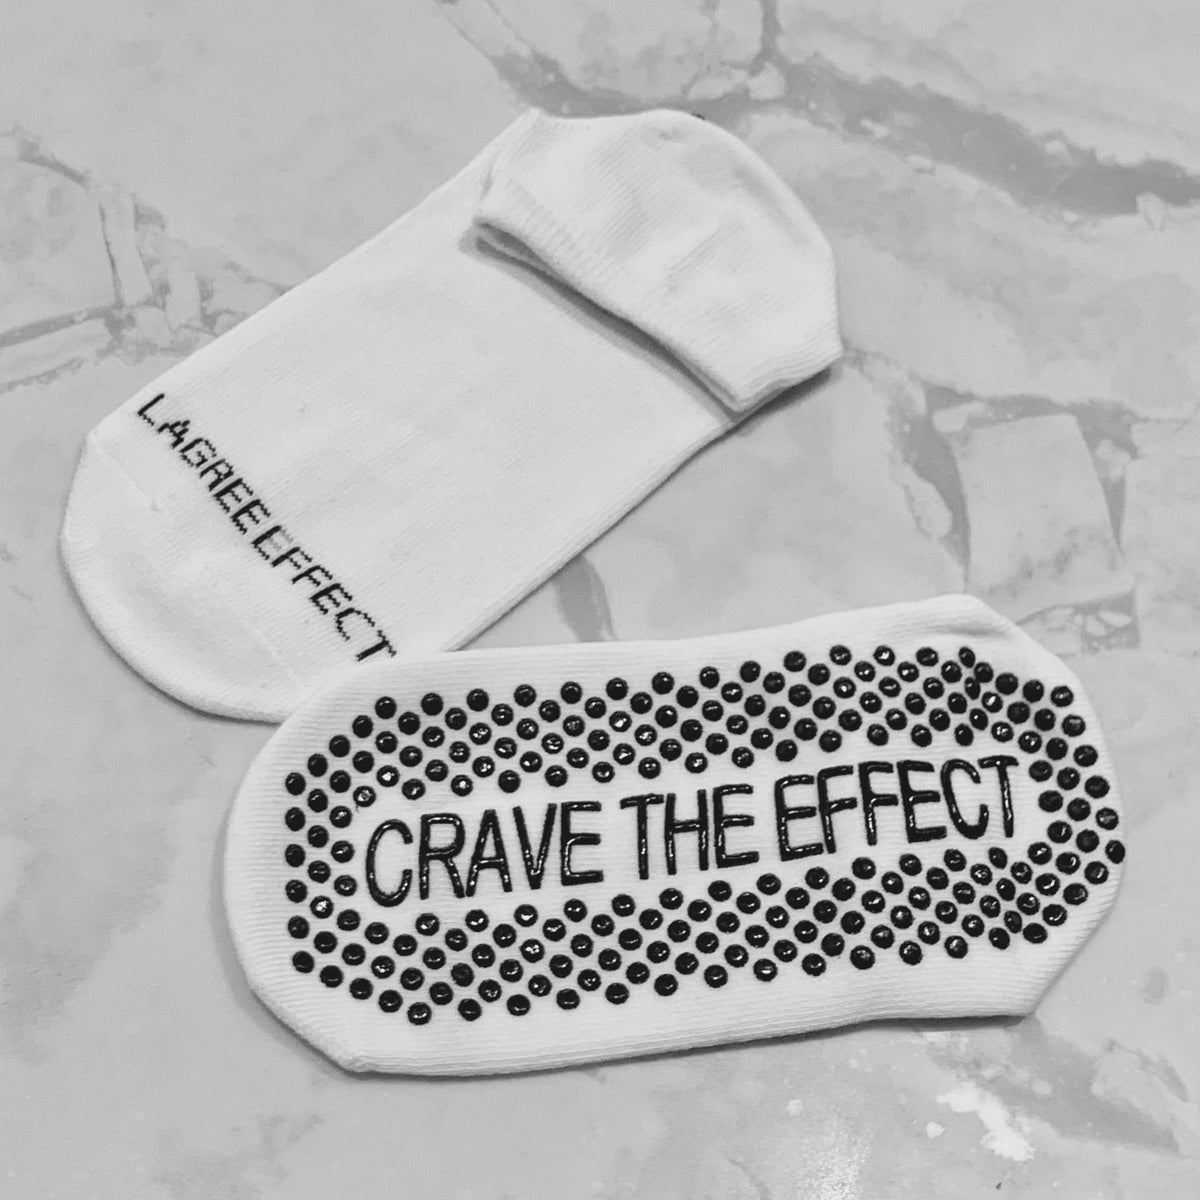 WHITE CRAVE THE EFFECT GRIP SOCKS